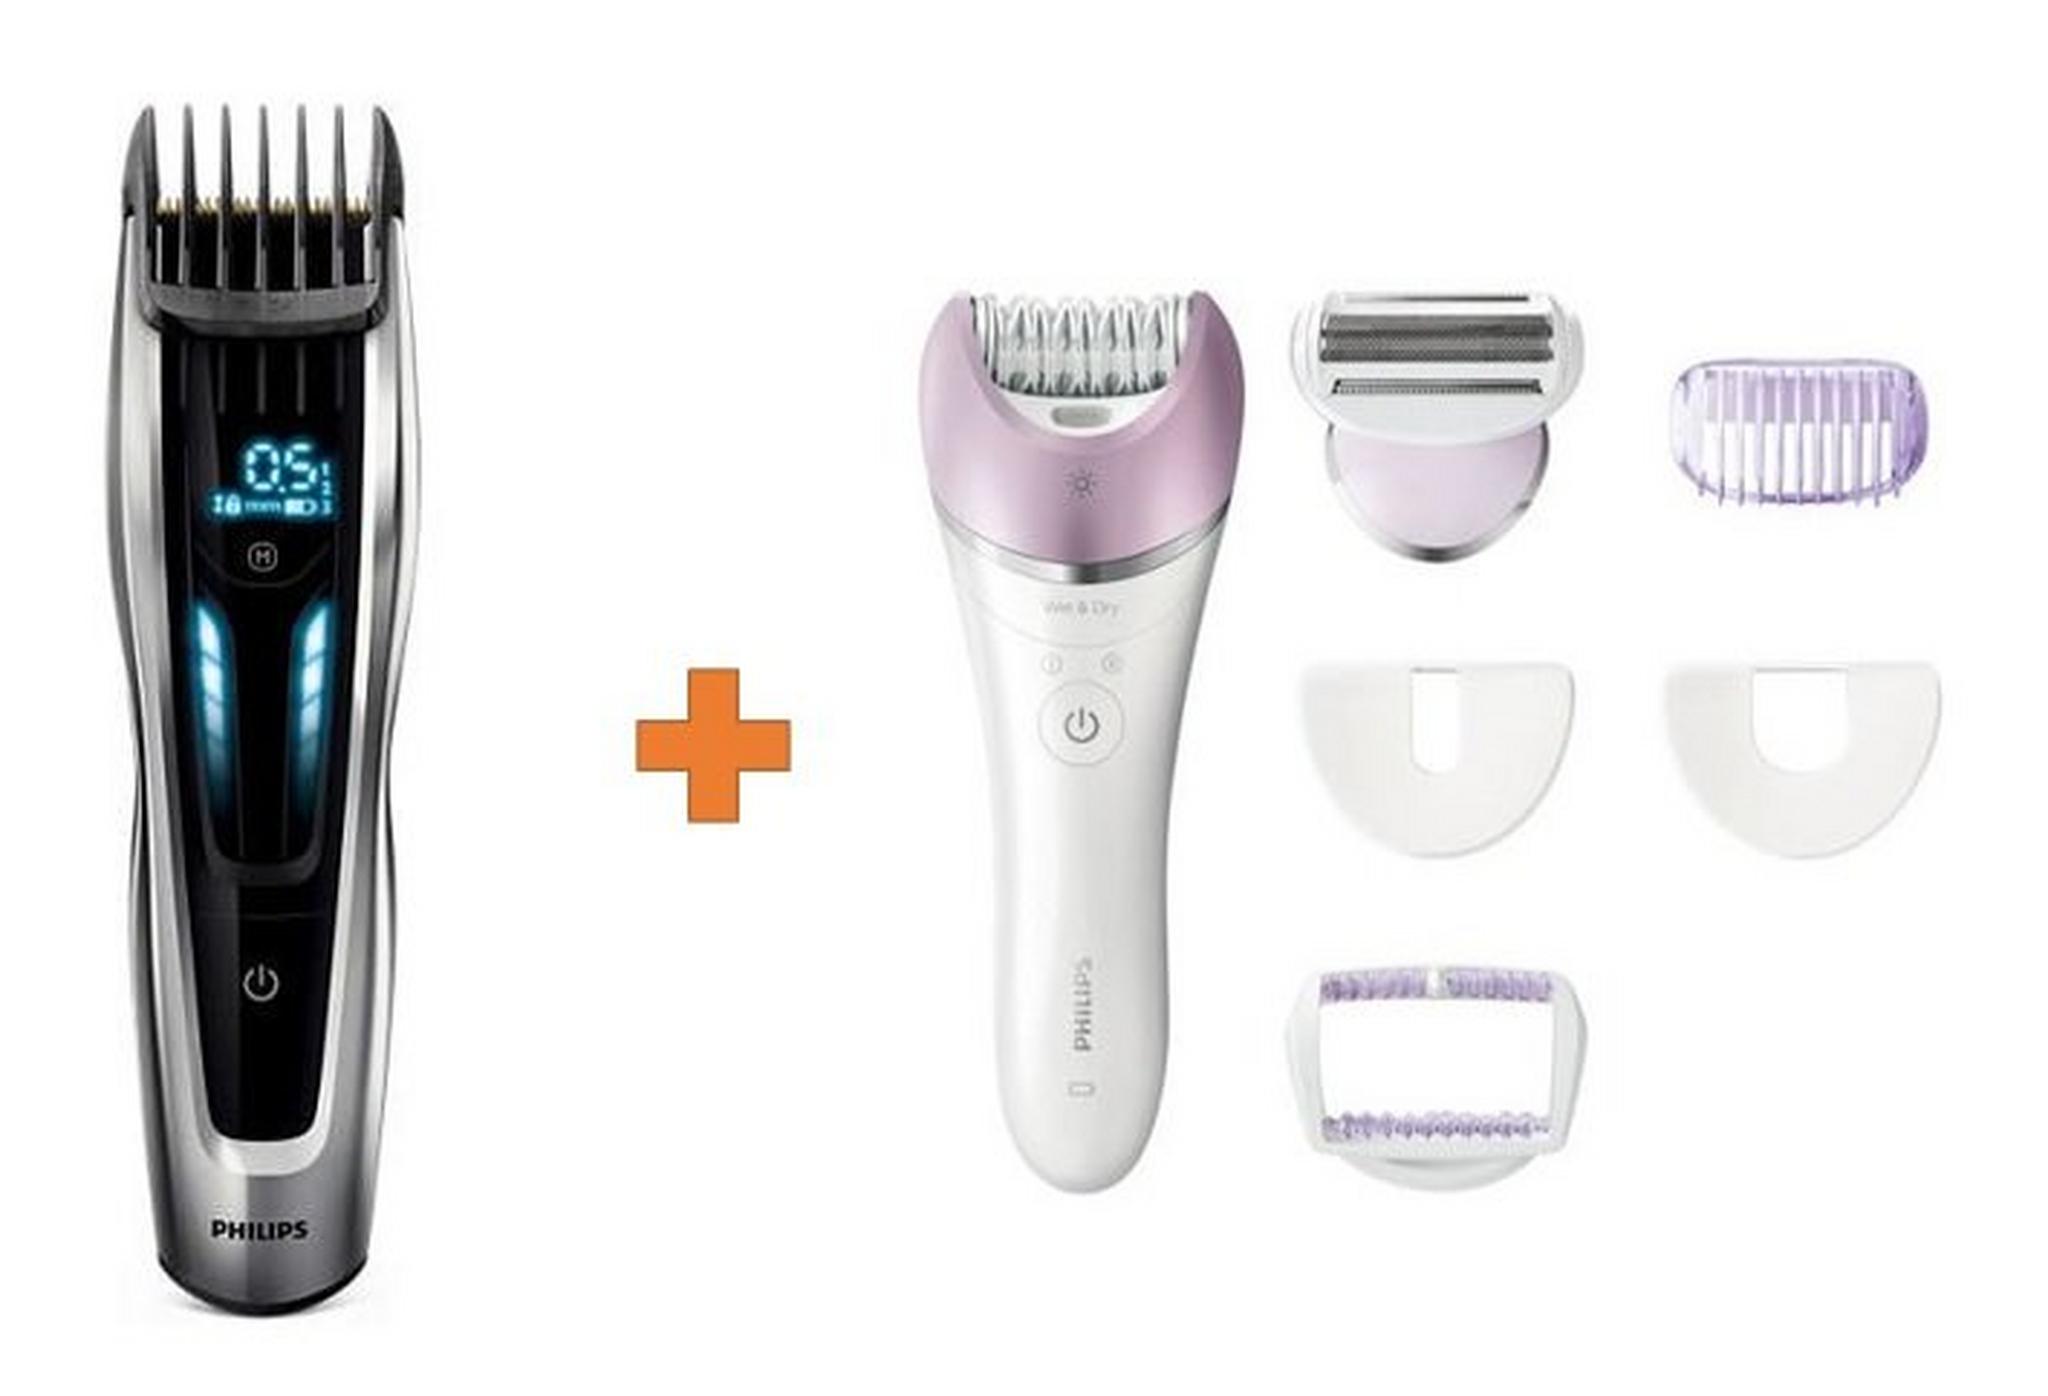 Philips Series 9000 Hair Clipper with Motorized Combs + Philips Satinelle Advanced Wet & Dry Epilator